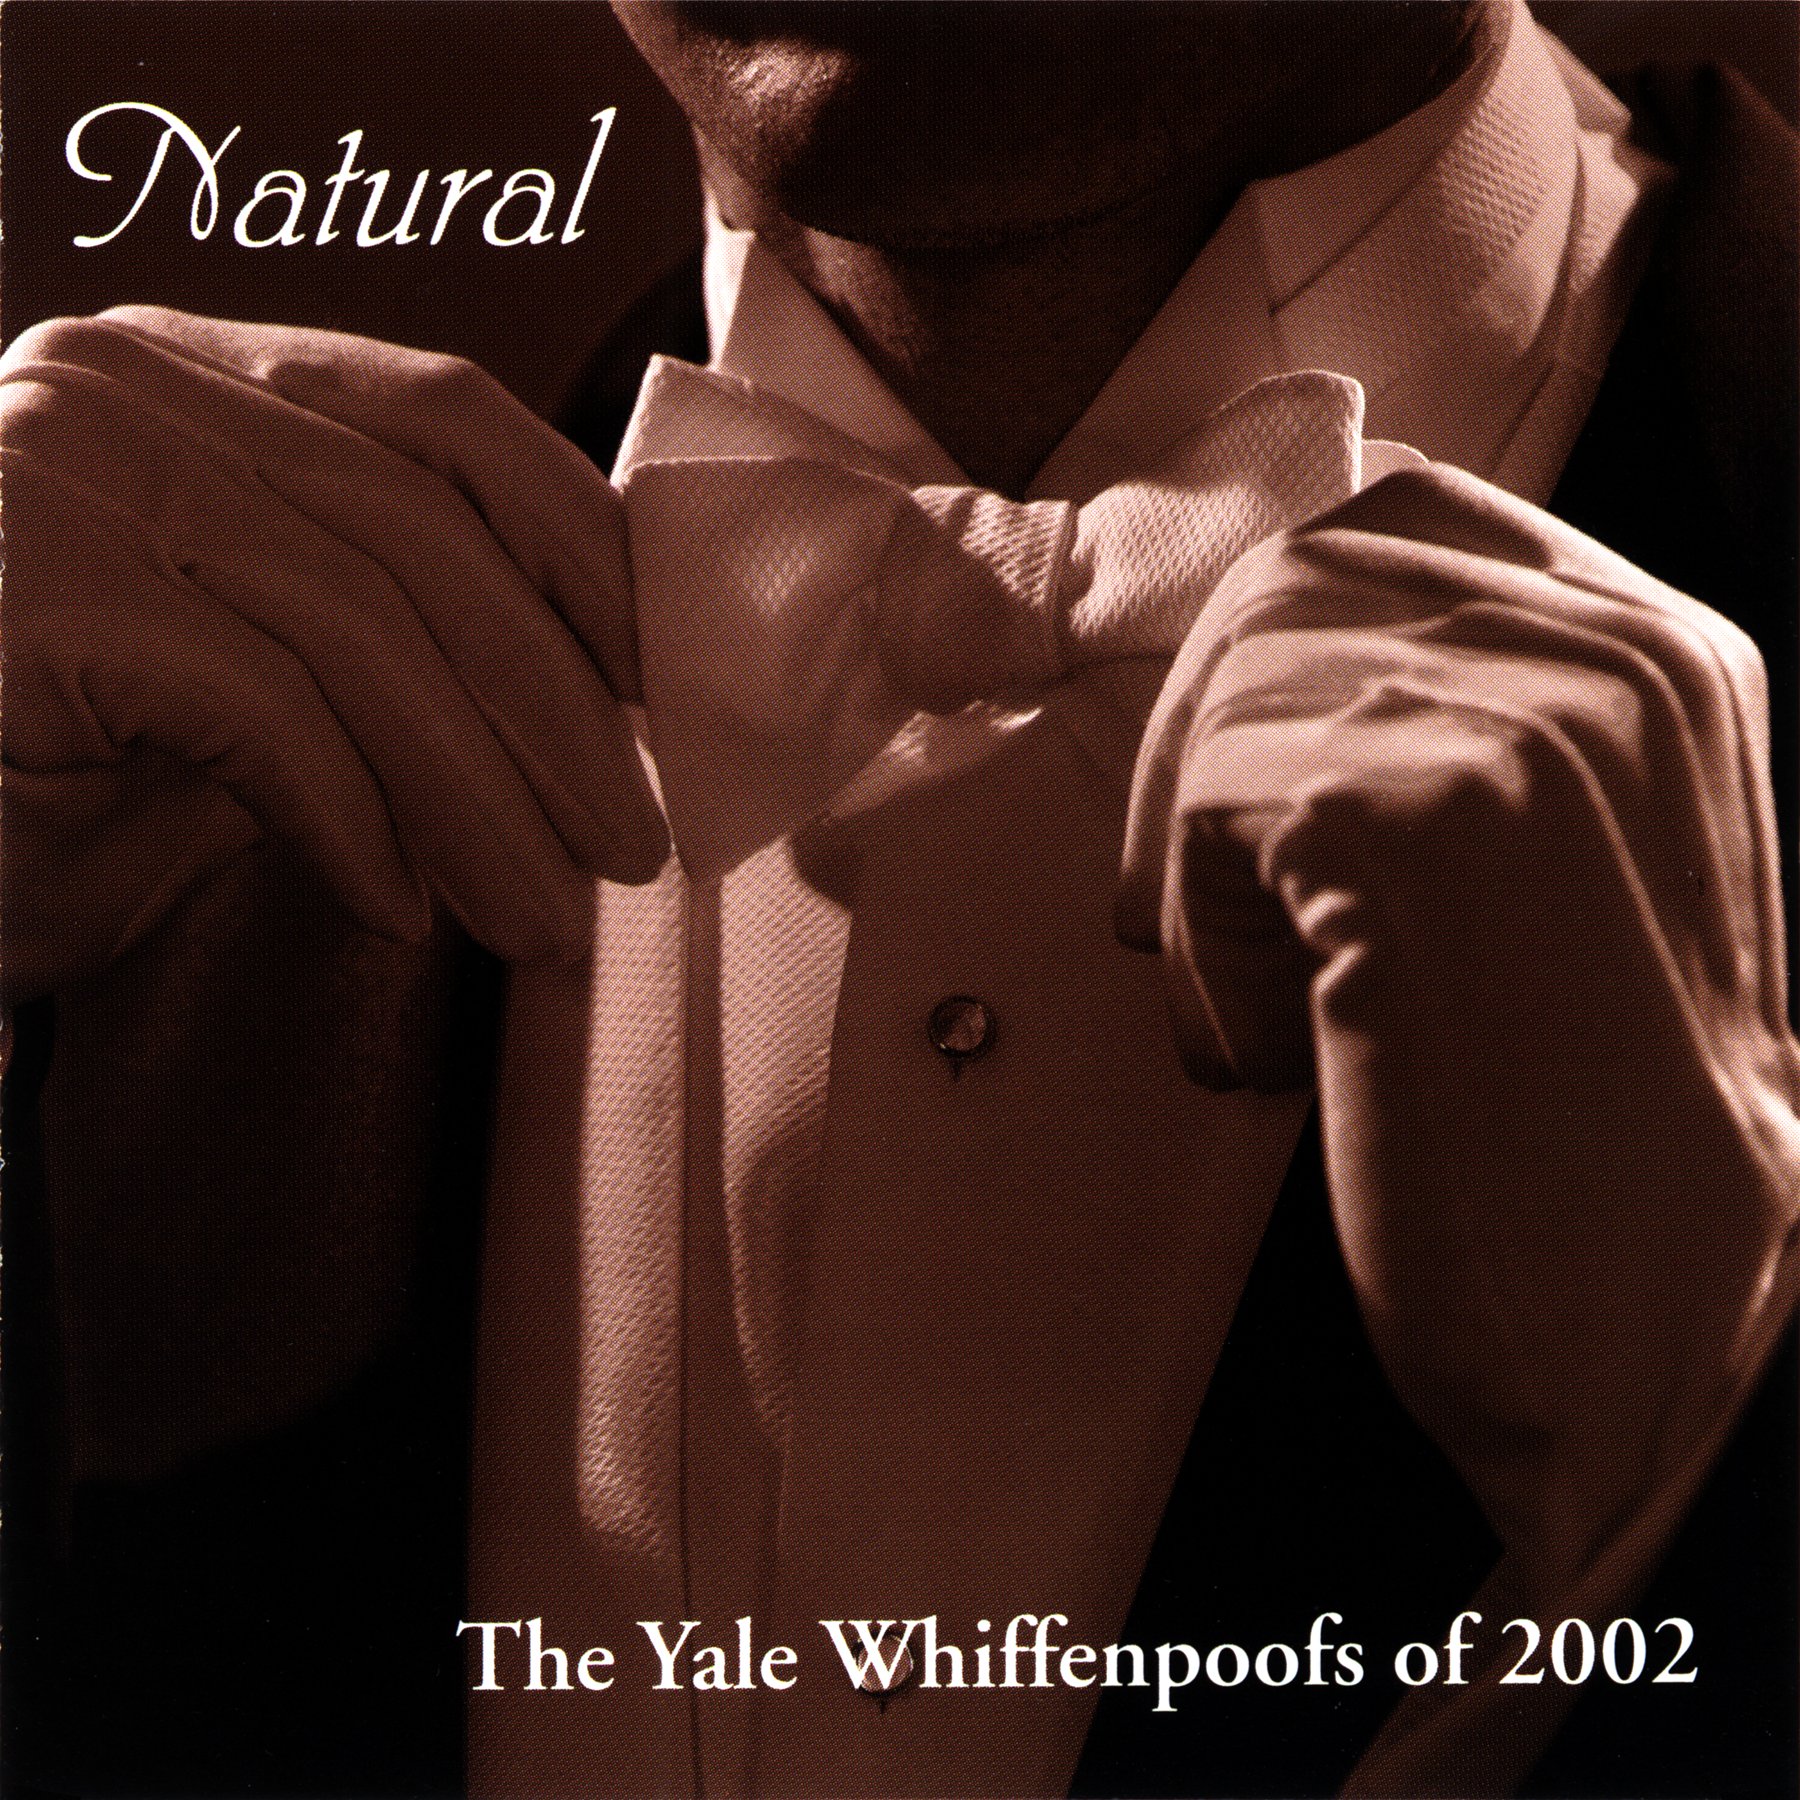 Natural  The Yale Whiffenpoofs of 2002, 2002